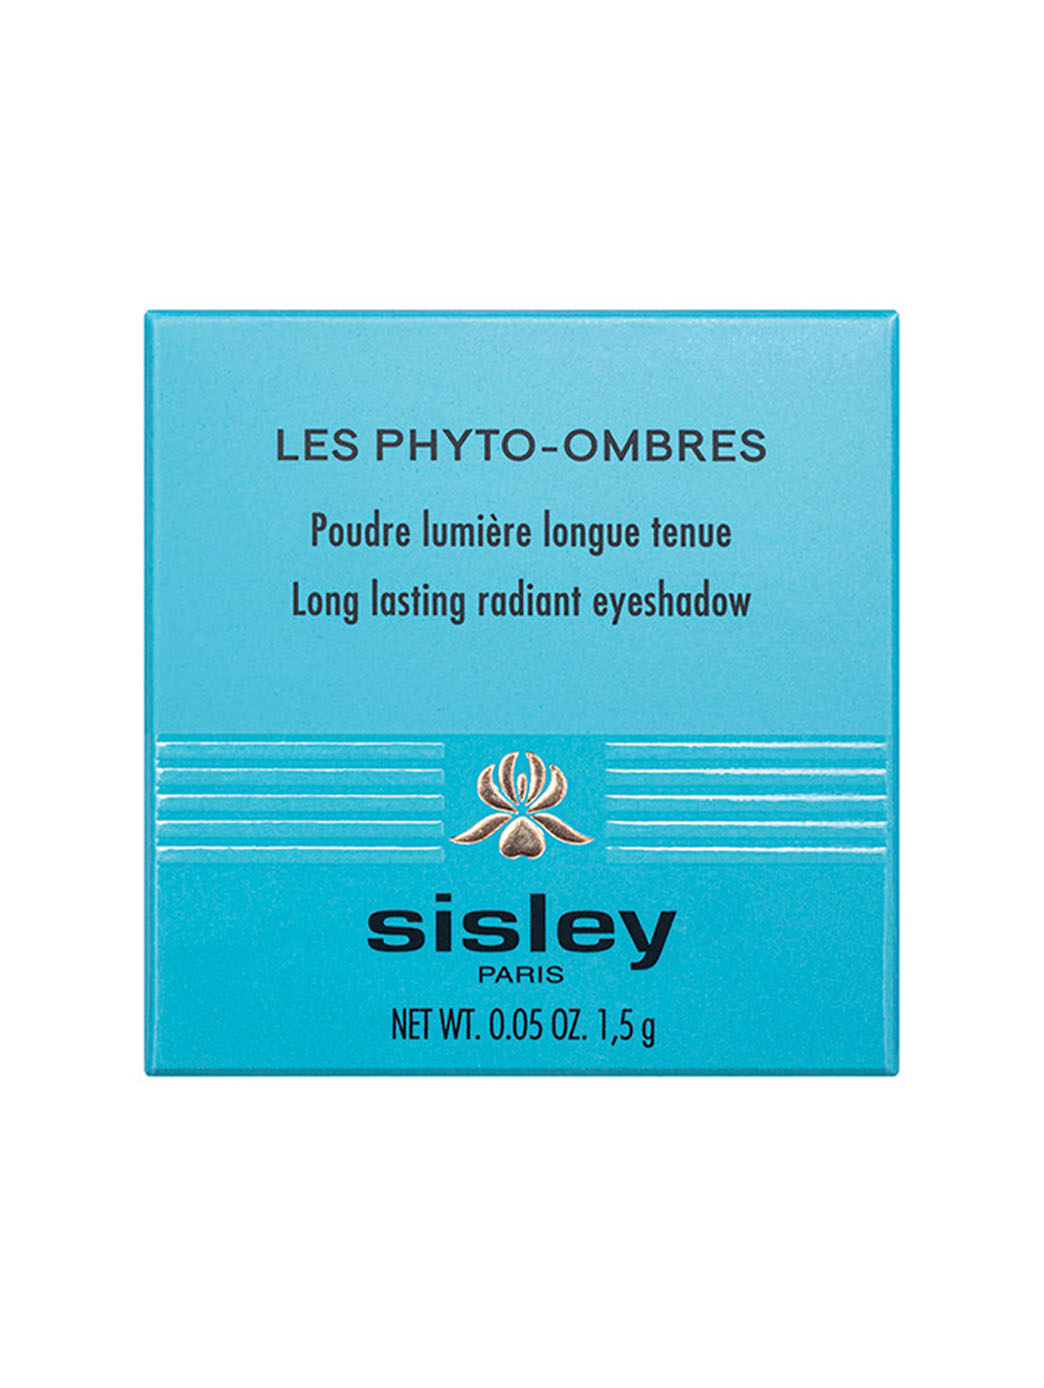 42472957509782 - Les Phyto-Ombres